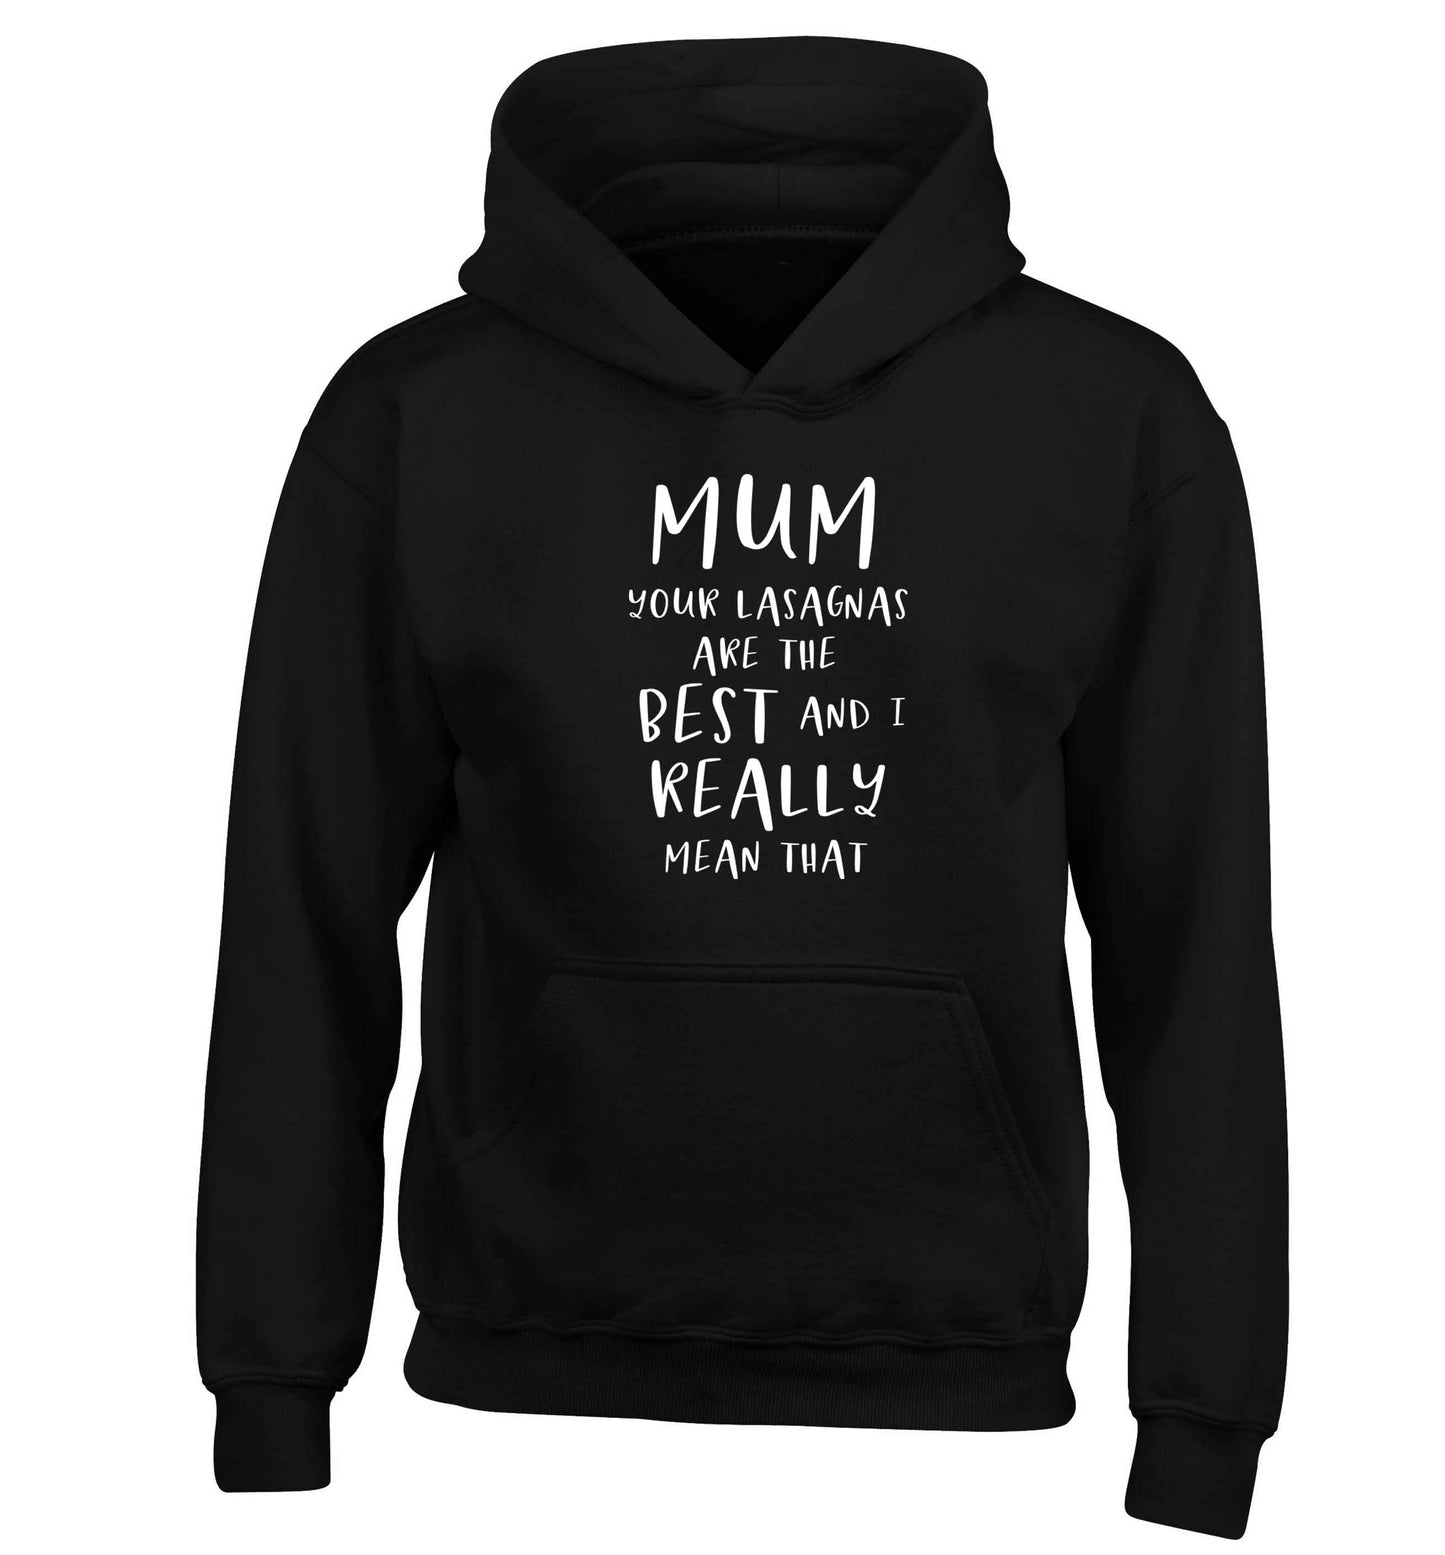 Funny gifts for your mum on mother's dayor her birthday! Mum your lasagnas are the best and I really mean that children's black hoodie 12-13 Years